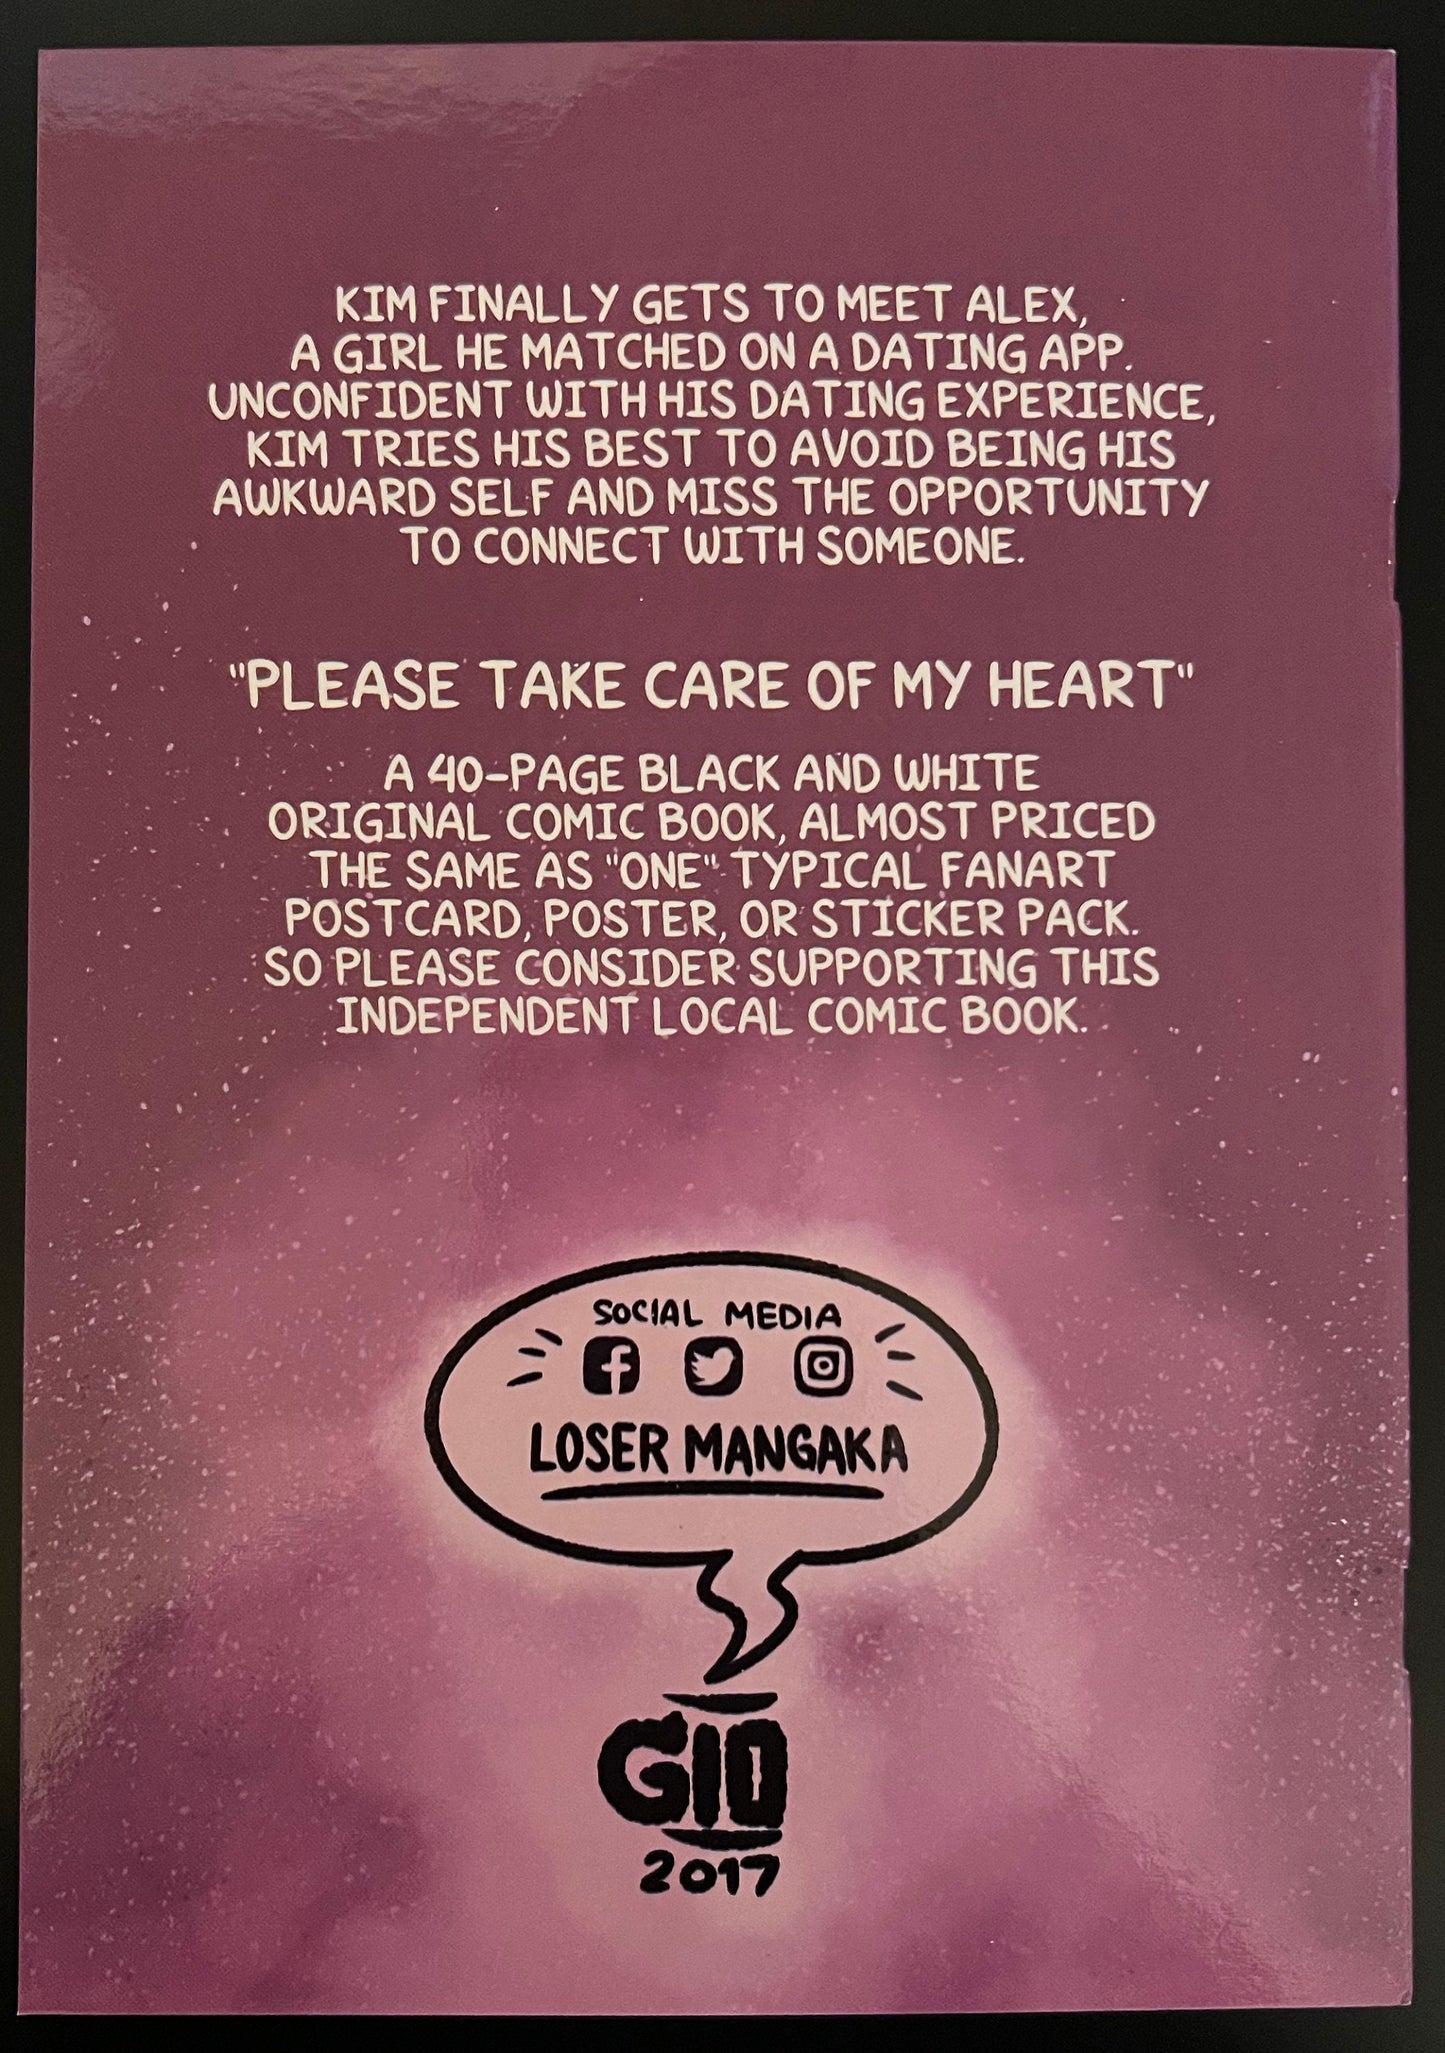 Please Take Care of my Heart by Loser Mangaka